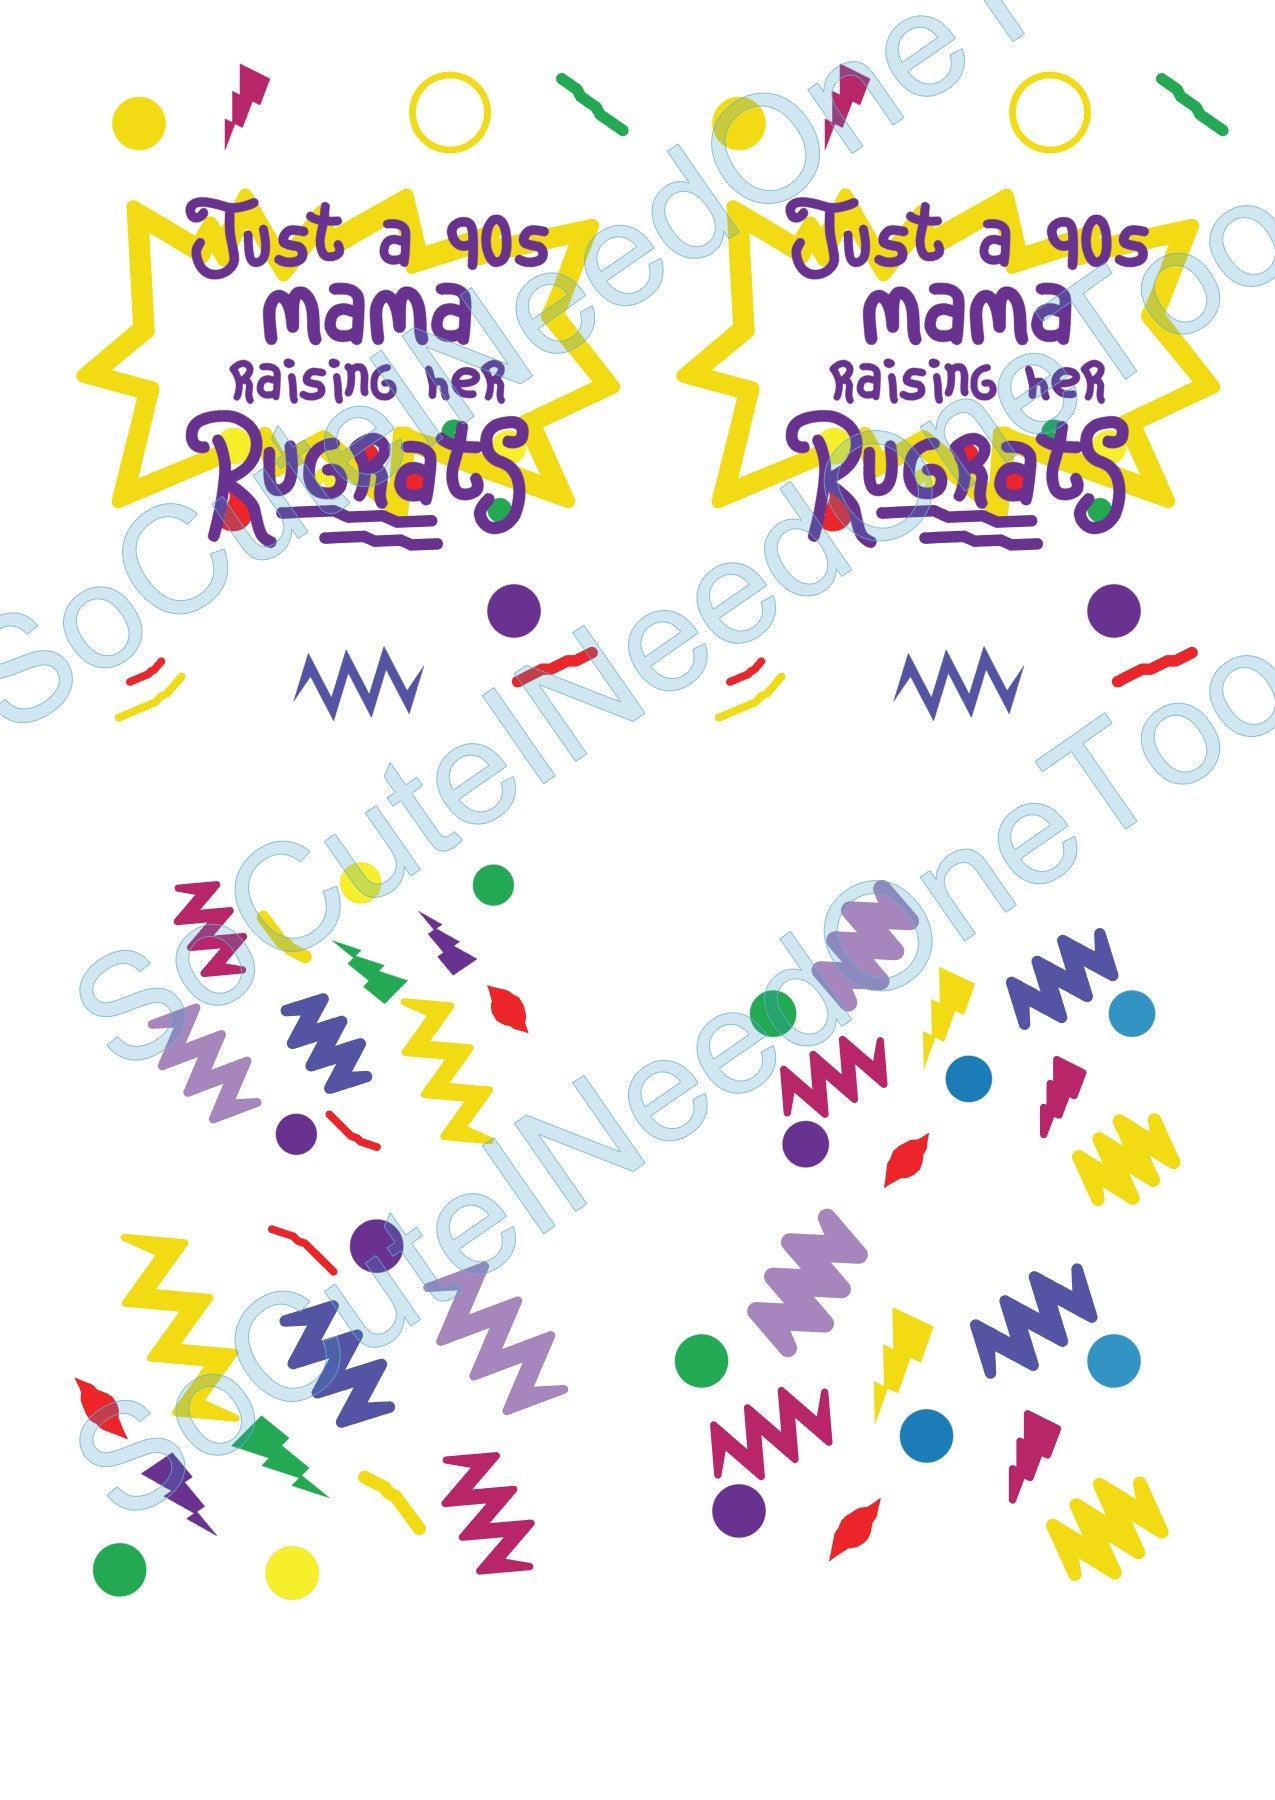 Rugrats - 90s Mama Raising her Rugrats on Clear/White Waterslide Paper Ready To Use - SoCuteINeedOneToo